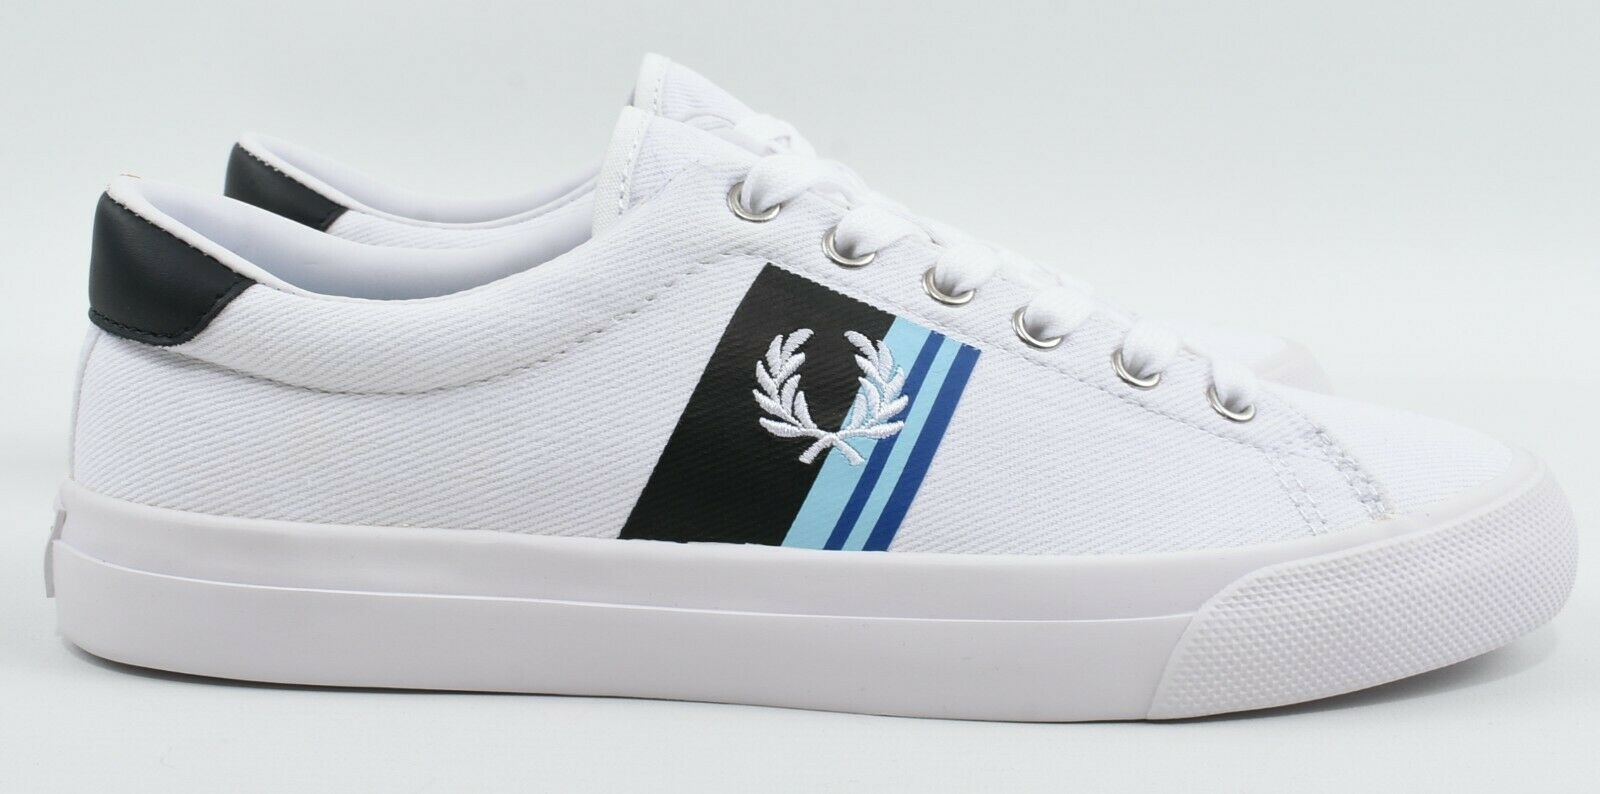 FRED PERRY Women's Canvas Sneakers Trainers, White, size UK 4 / EU 37